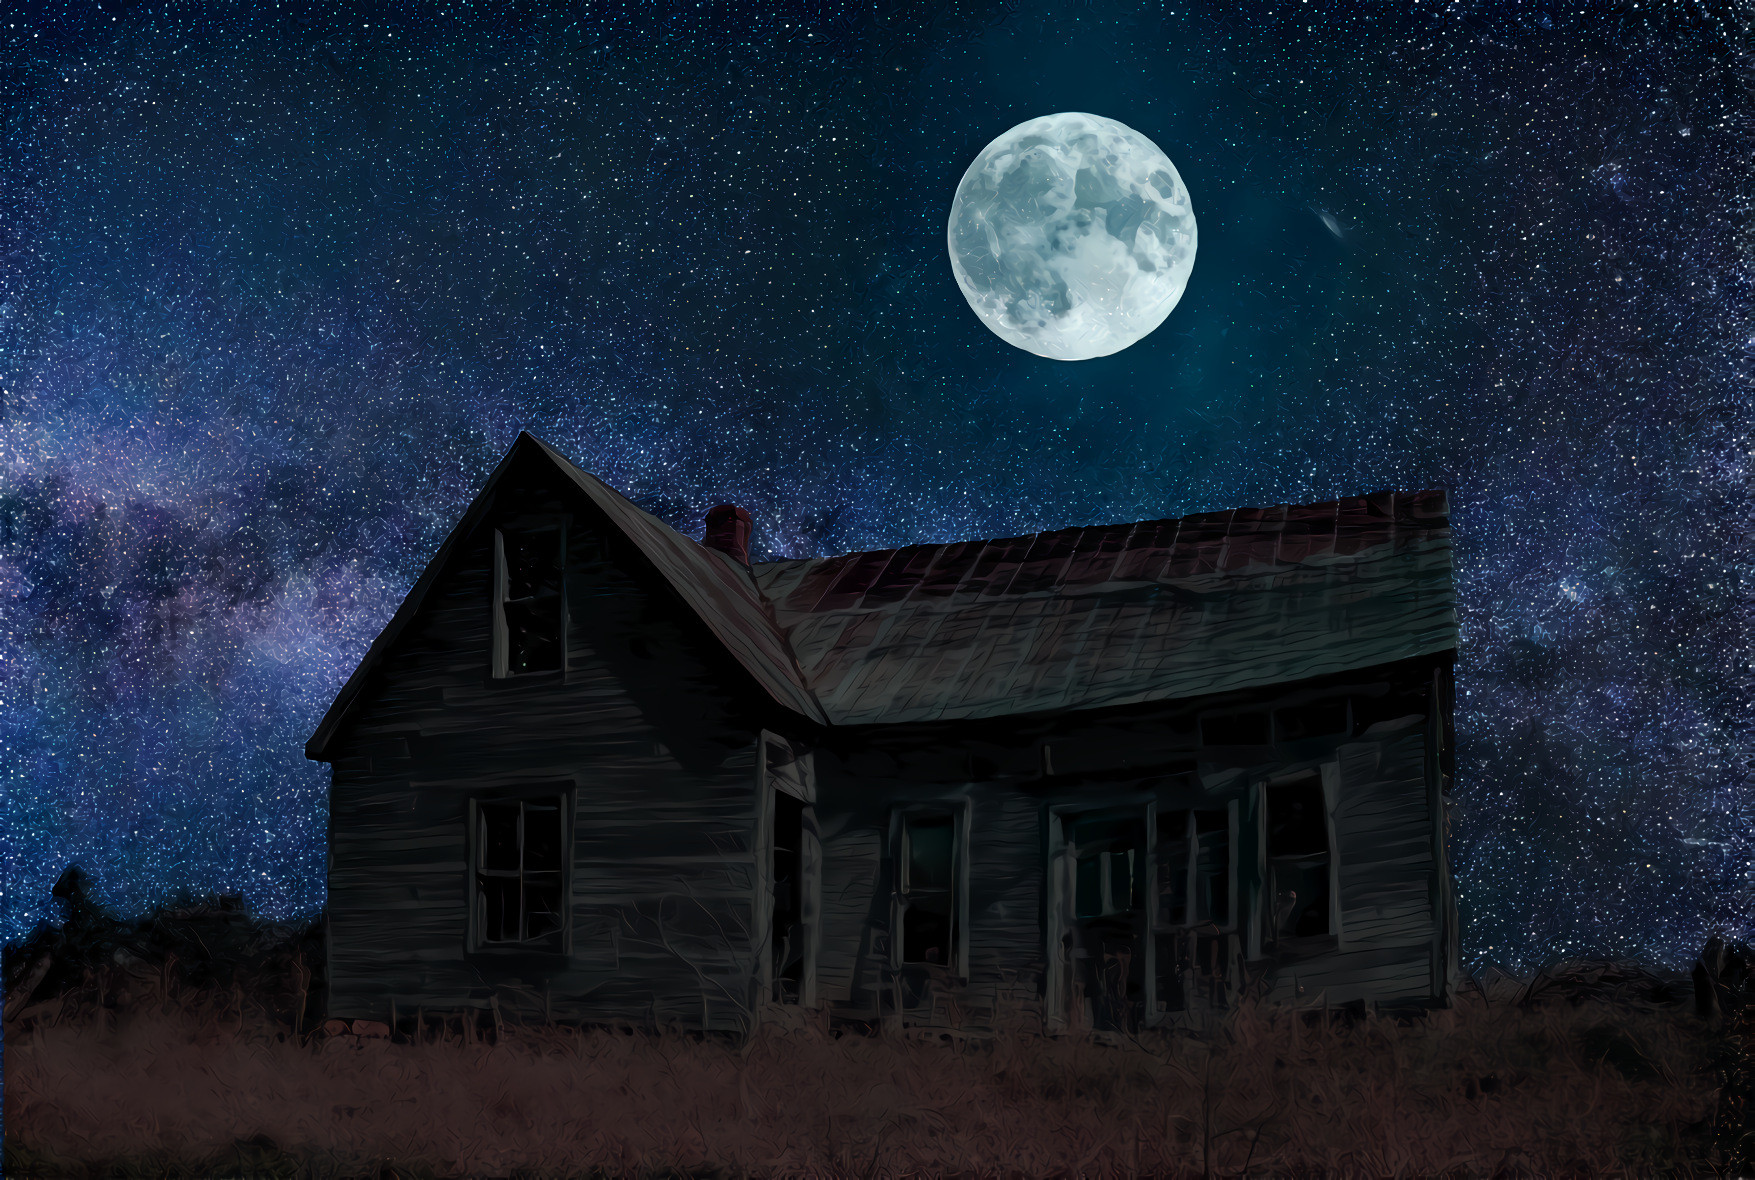 Abandoned Home and the Moon